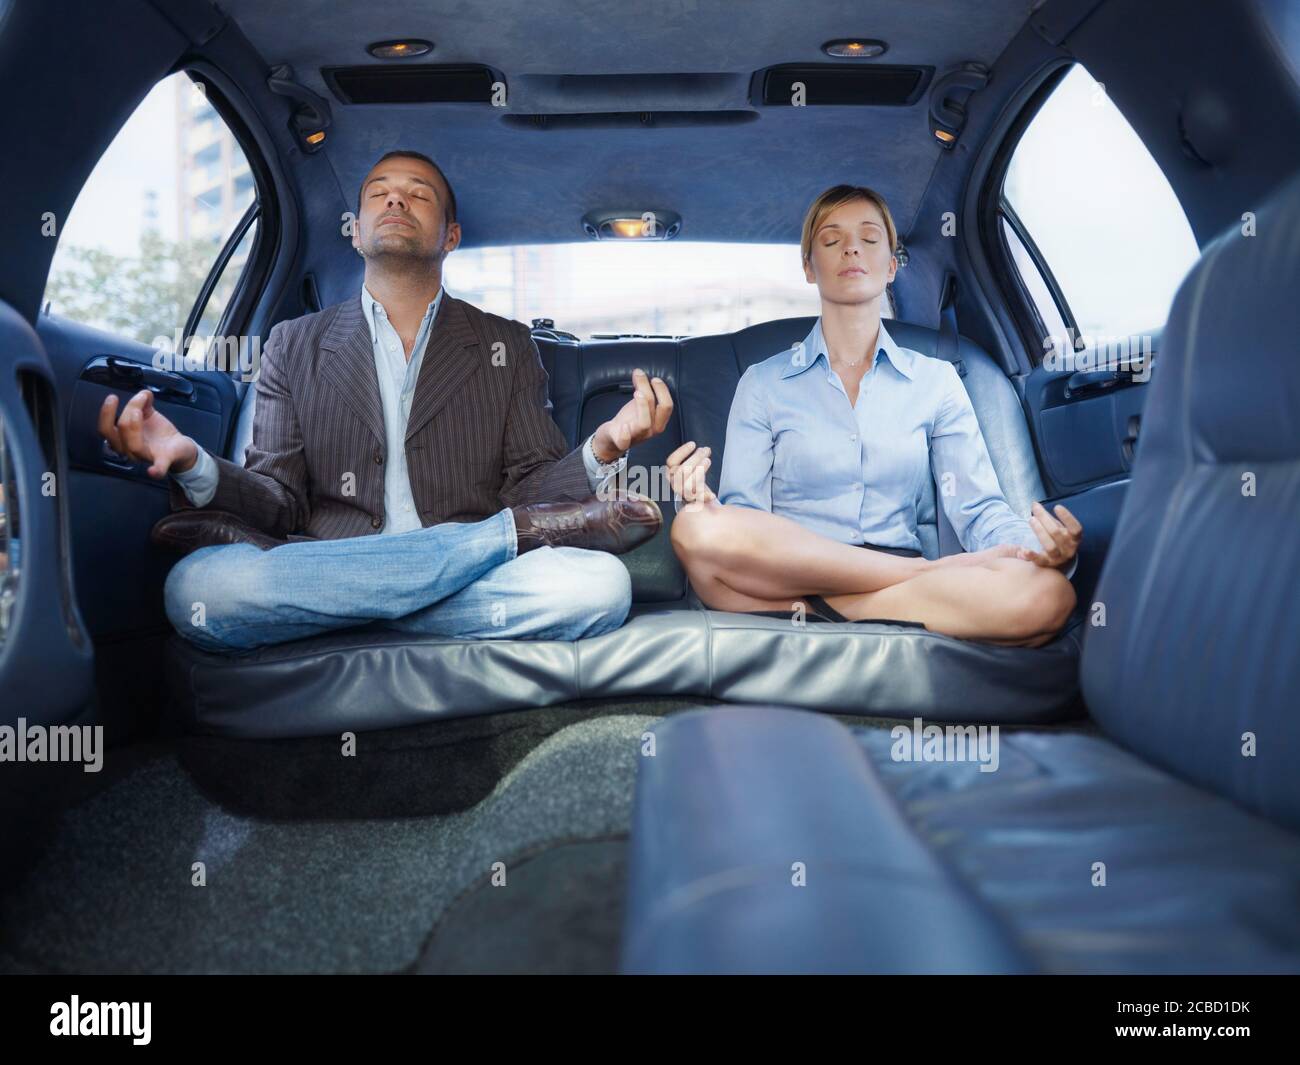 Businessman And Assistant Doing Yoga Sitting In Limousine Car Stock Photo